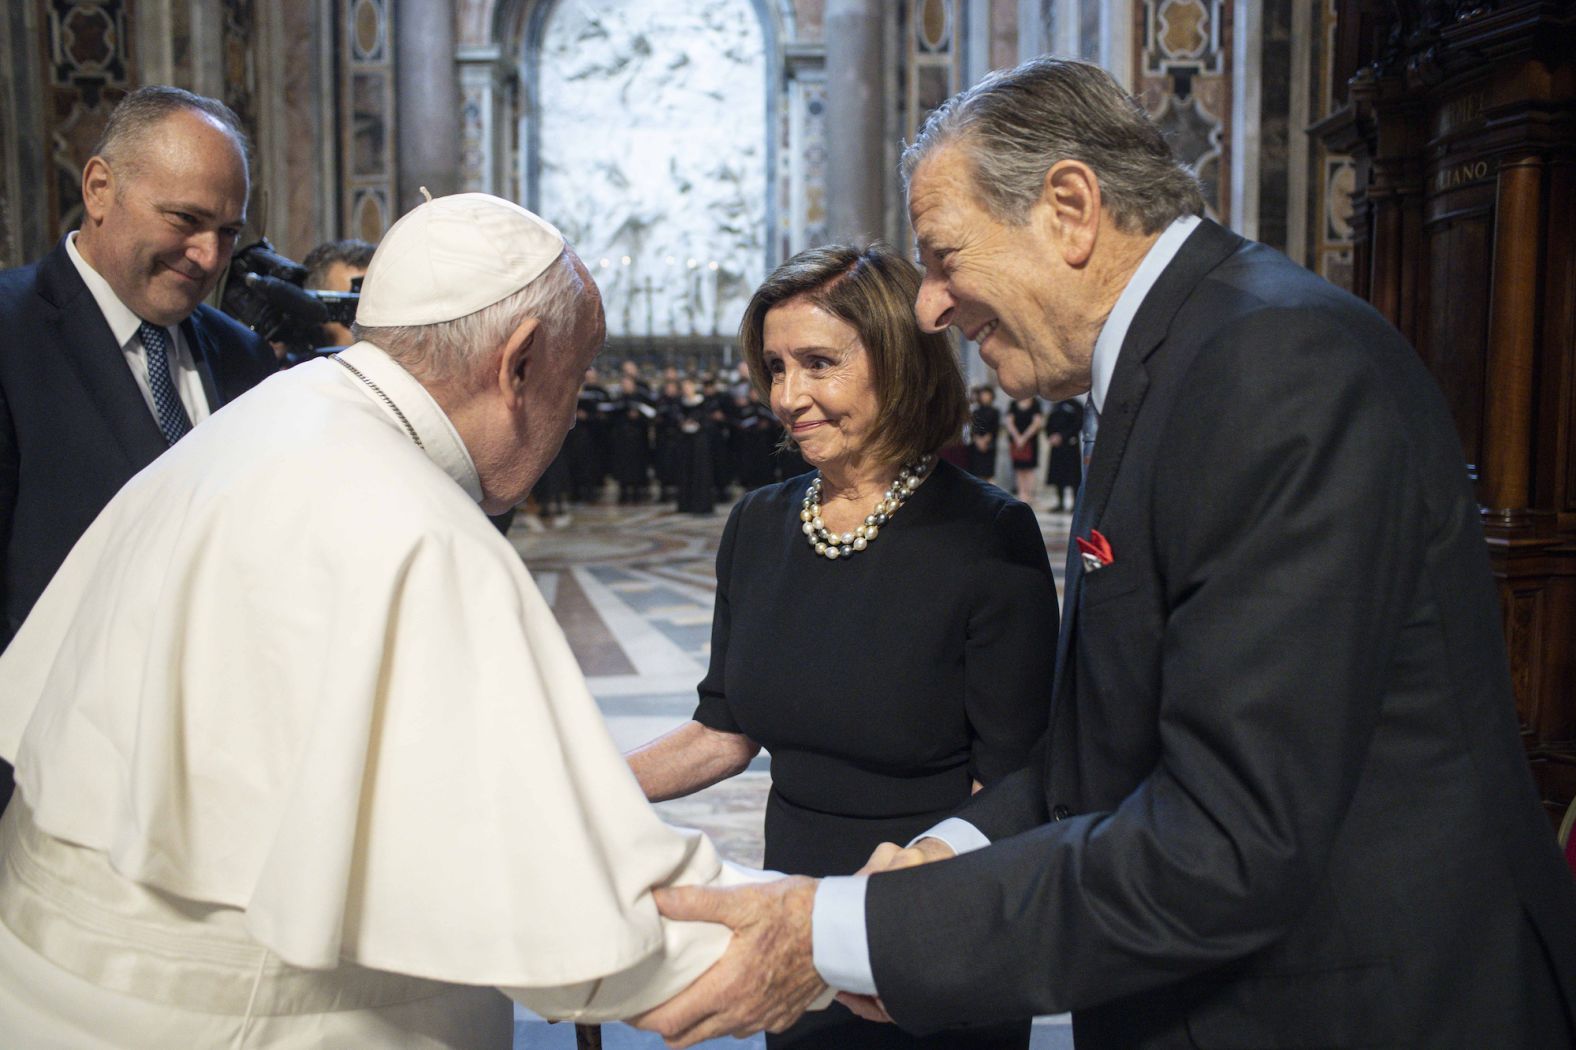 Pope Francis greets Pelosi and her husband, Paul, before celebrating a Mass in St. Peter's Basilica at the Vatican in June 2022. Pelosi received communion during Mass <a href="index.php?page=&url=https%3A%2F%2Fwww.cnn.com%2F2022%2F05%2F20%2Fpolitics%2Fpelosi-communion-ban-abortion-san-francisco-archdiocese%2Findex.html" target="_blank">despite her support for abortion rights</a>.